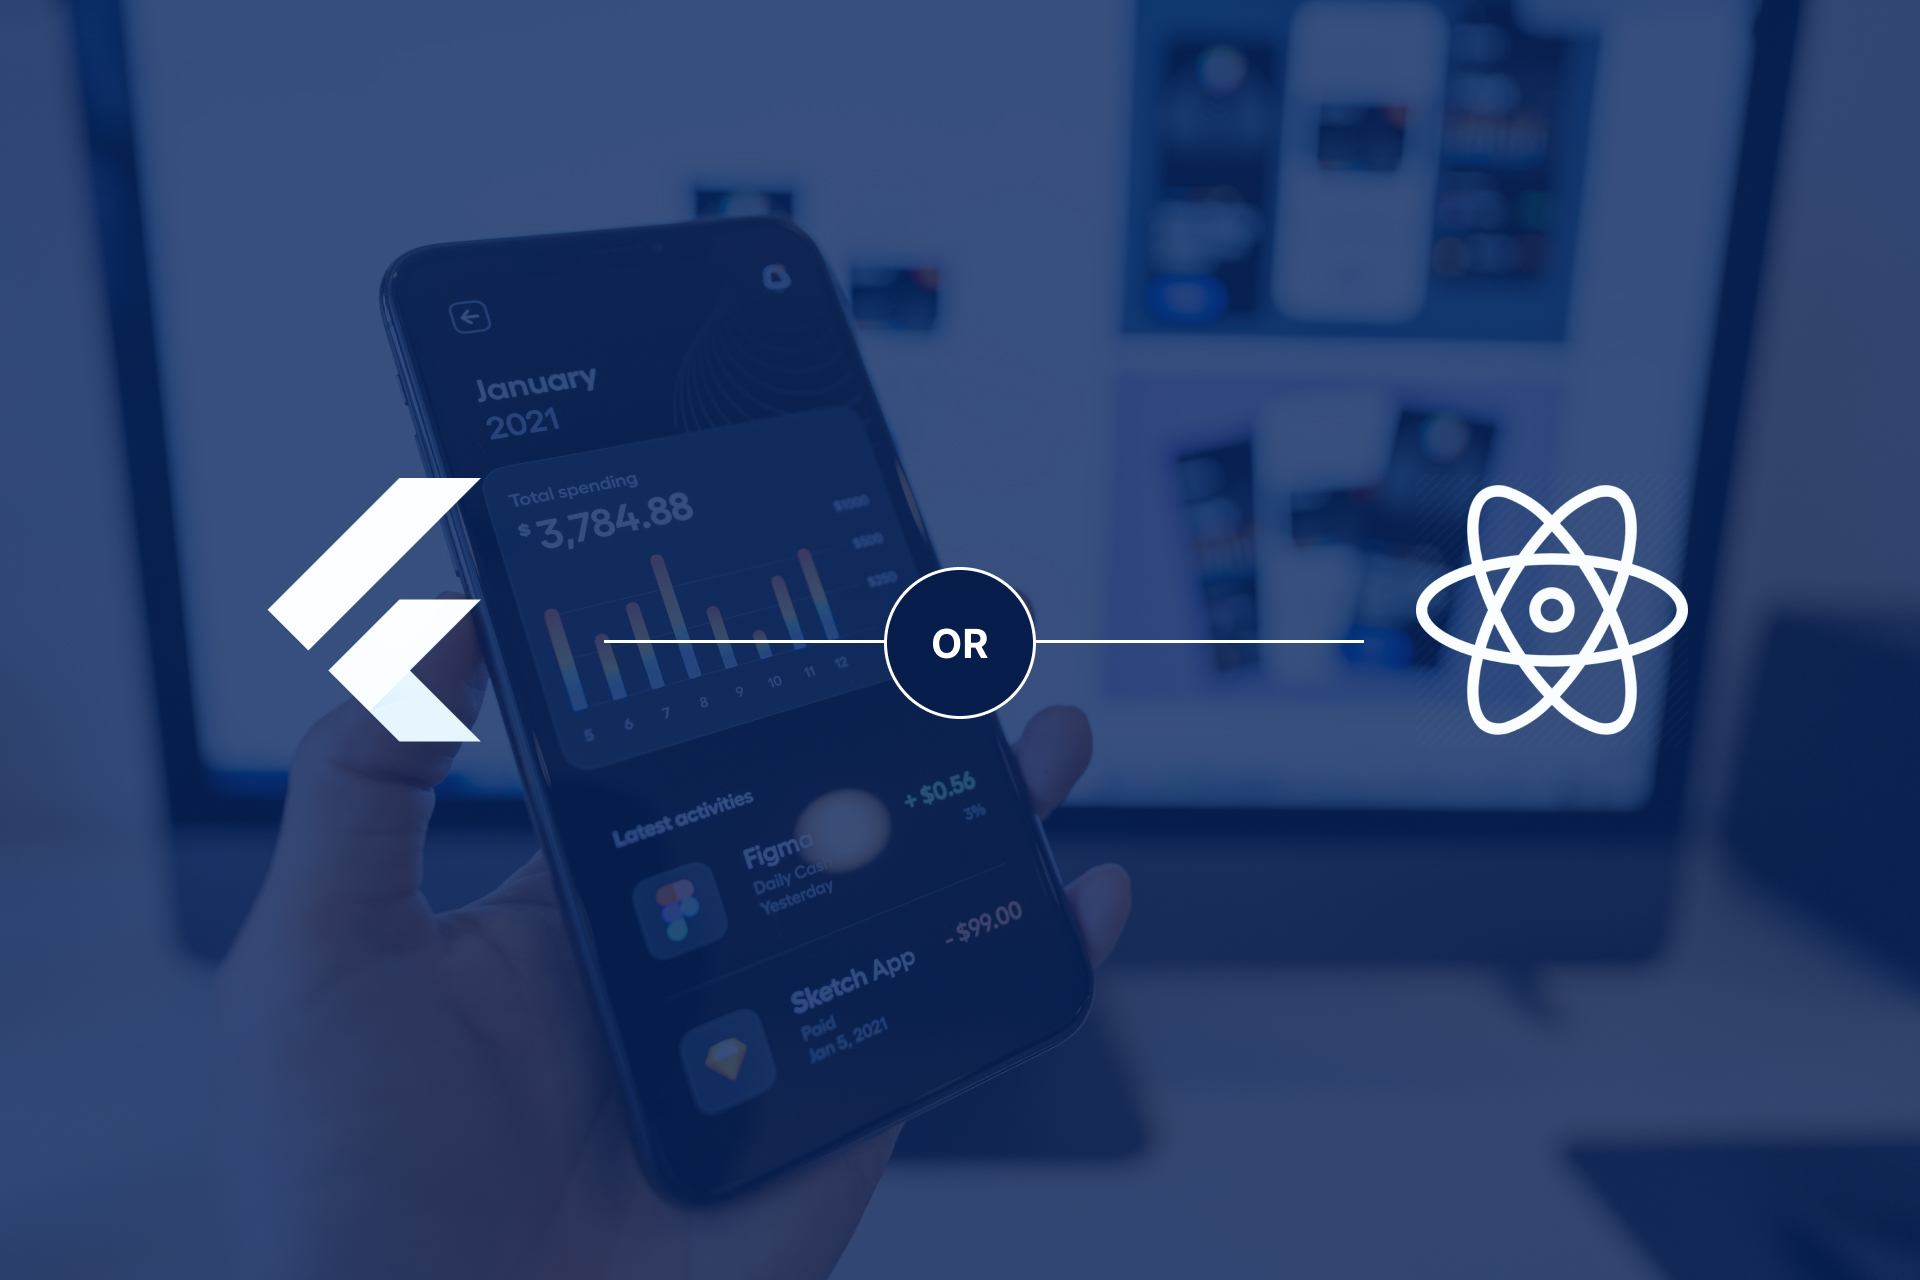 Flutter or React Native? Which is more advantageous